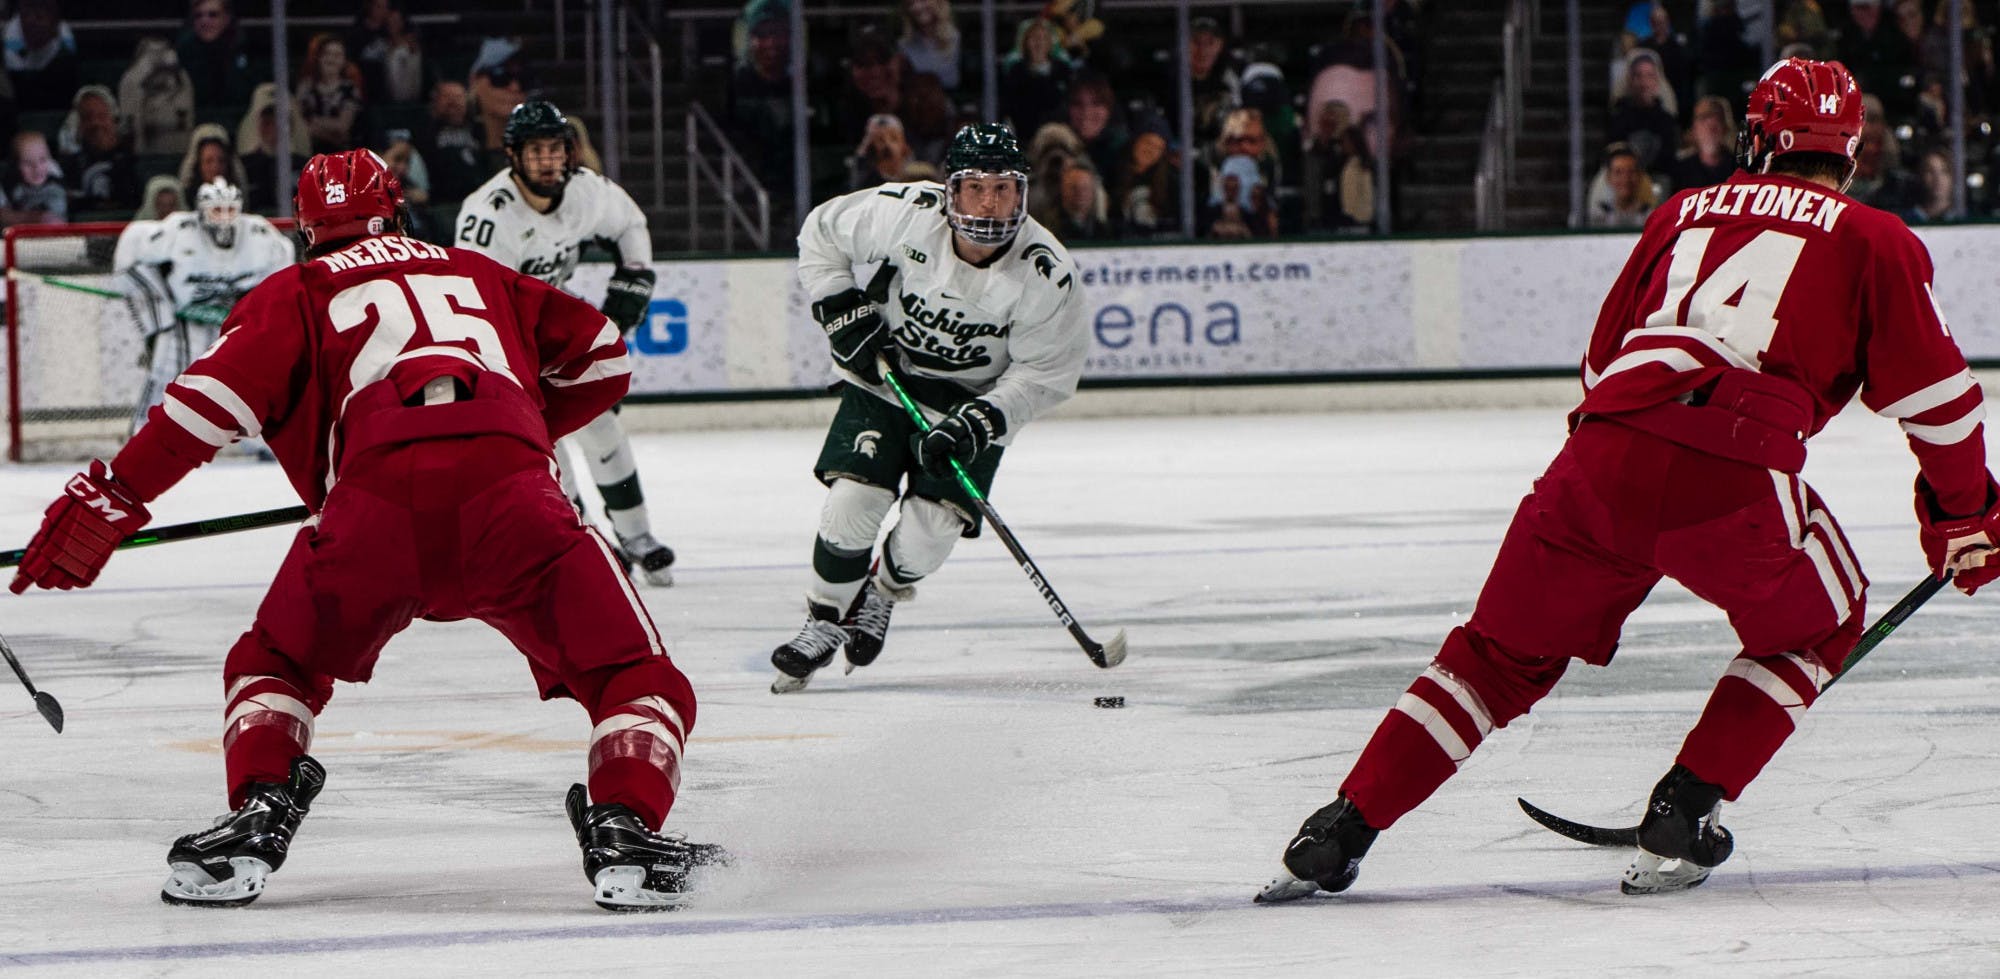 <p>Graduate student forward Charlie Combs (7) takes the puck back from the Michigan State goaltender and skates down the ice in the first period. The Badgers shut out the Spartans 4-0 at Munn Ice Arena on March 5, 2021. </p>